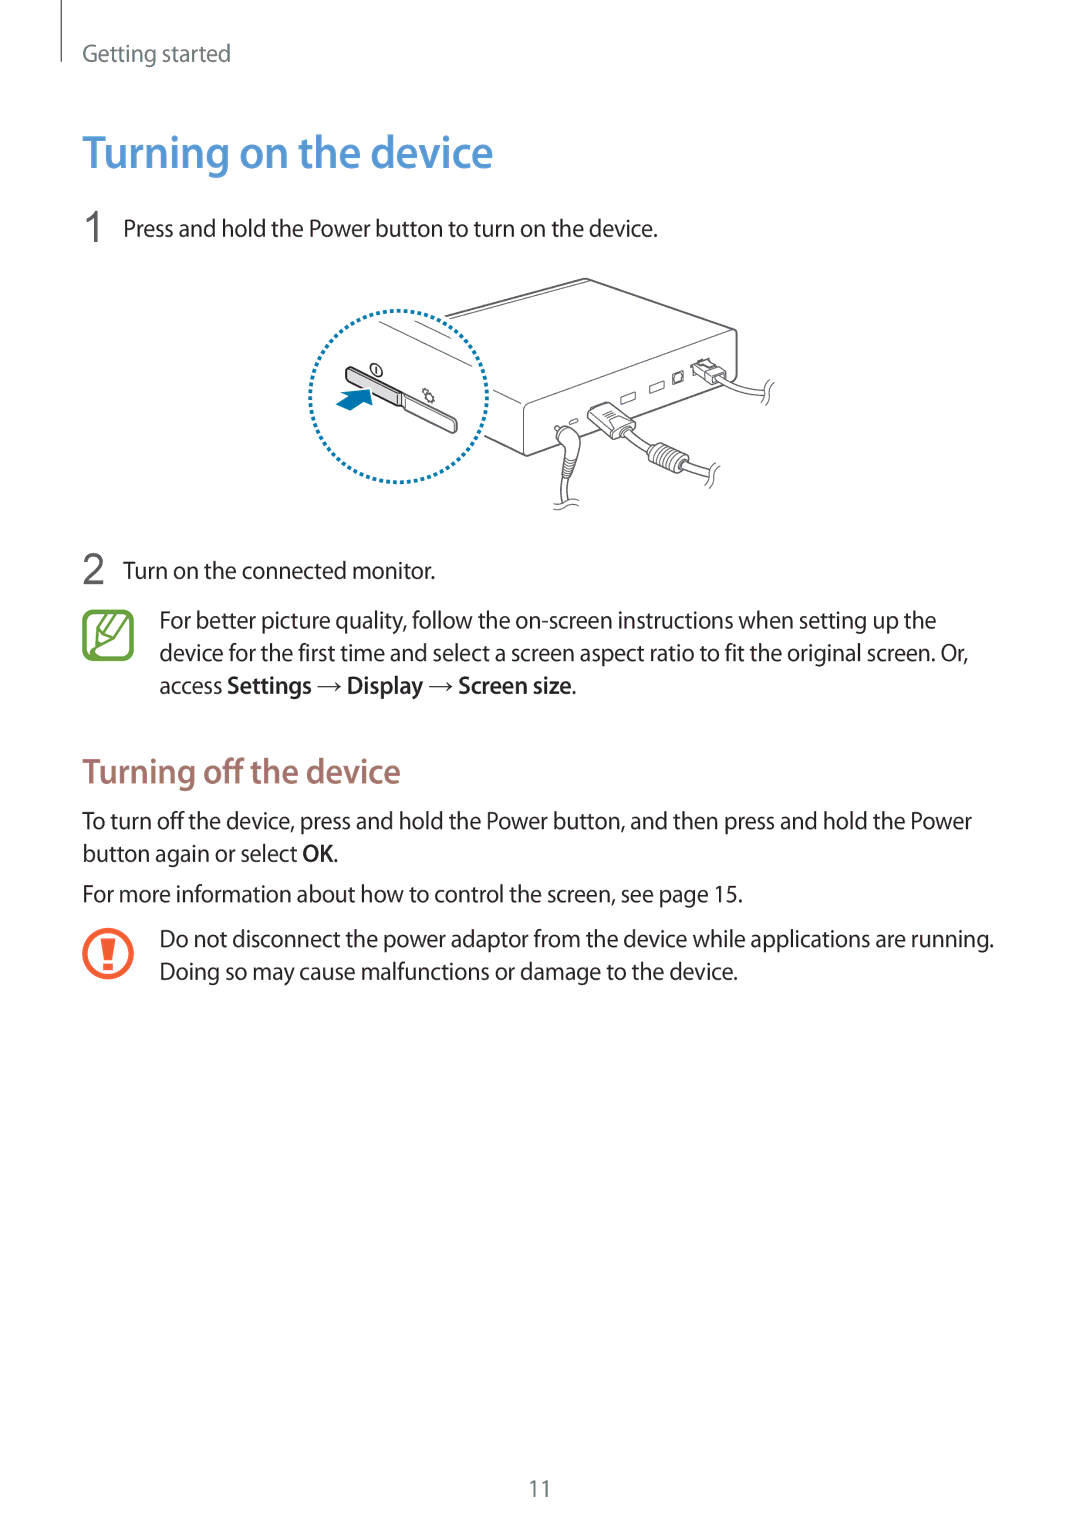 Samsung GT-B9150 user manual Turning on the device, Turning off the device 